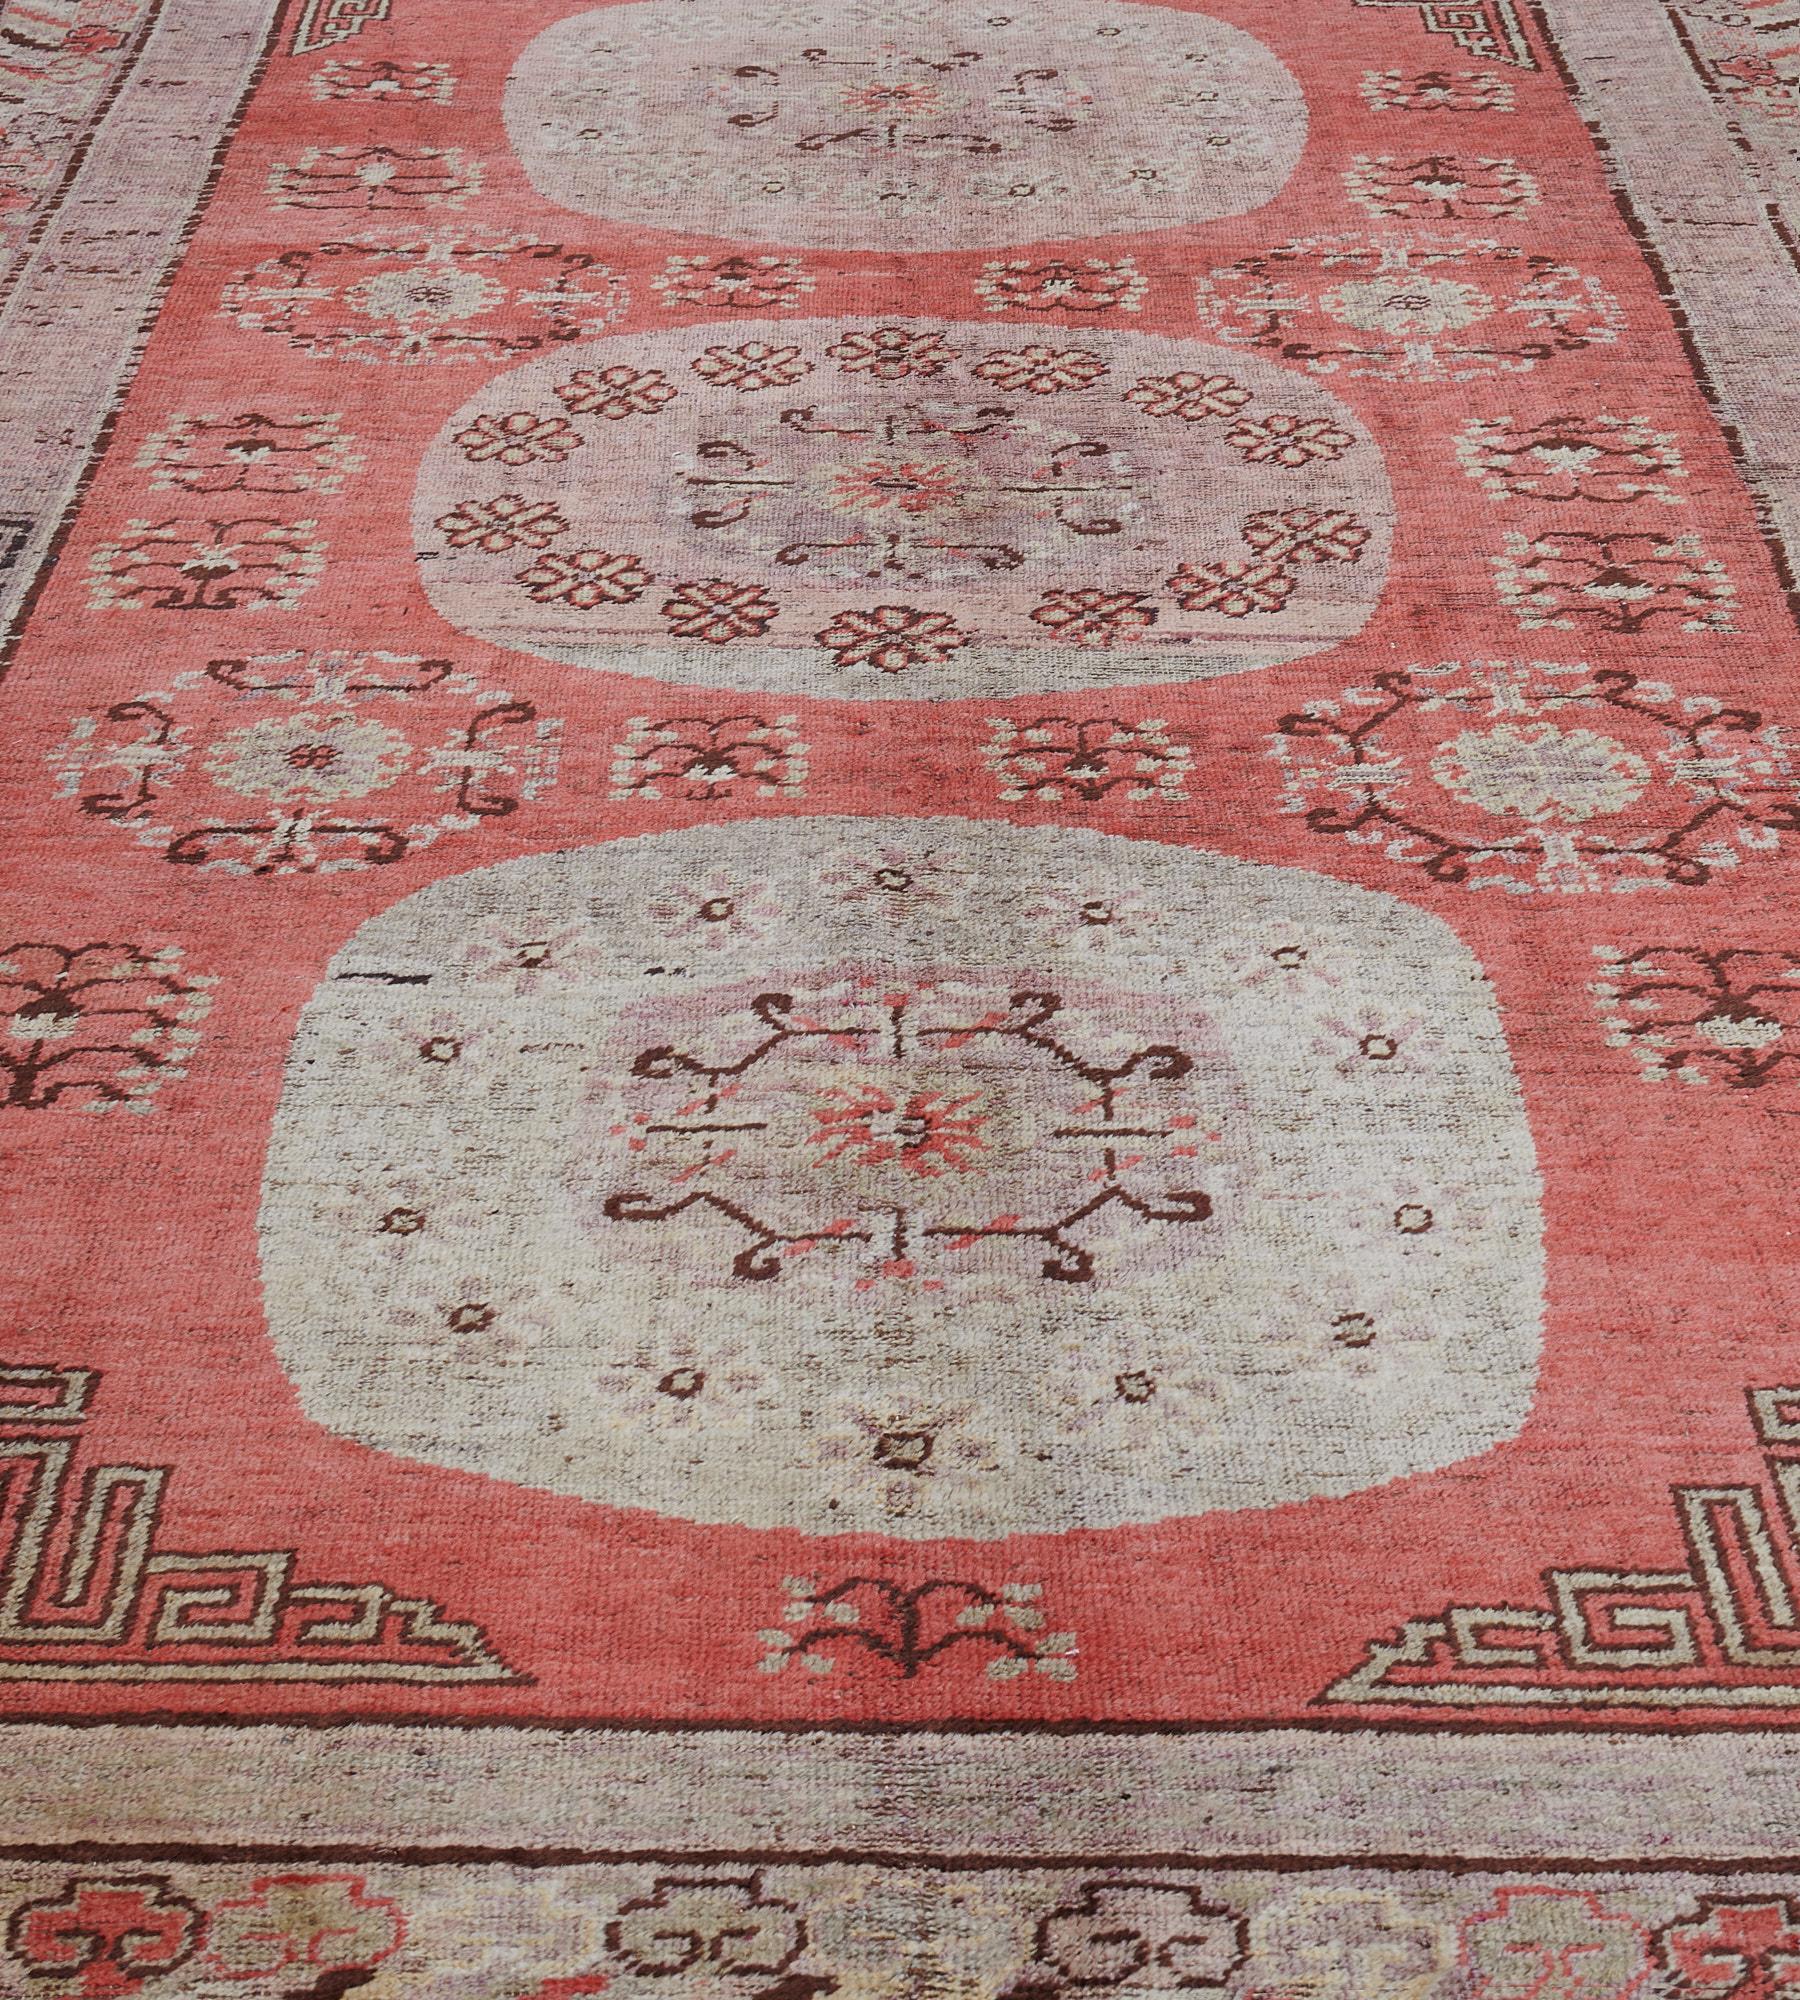 This antique, circa 1870, Khotan rug has a coral-red field with three large shaded pink roundels each containing a central roundel containing a flowerhead issuing angular floral vine, an outer band of flowerheads, surrounded by flowering plants and